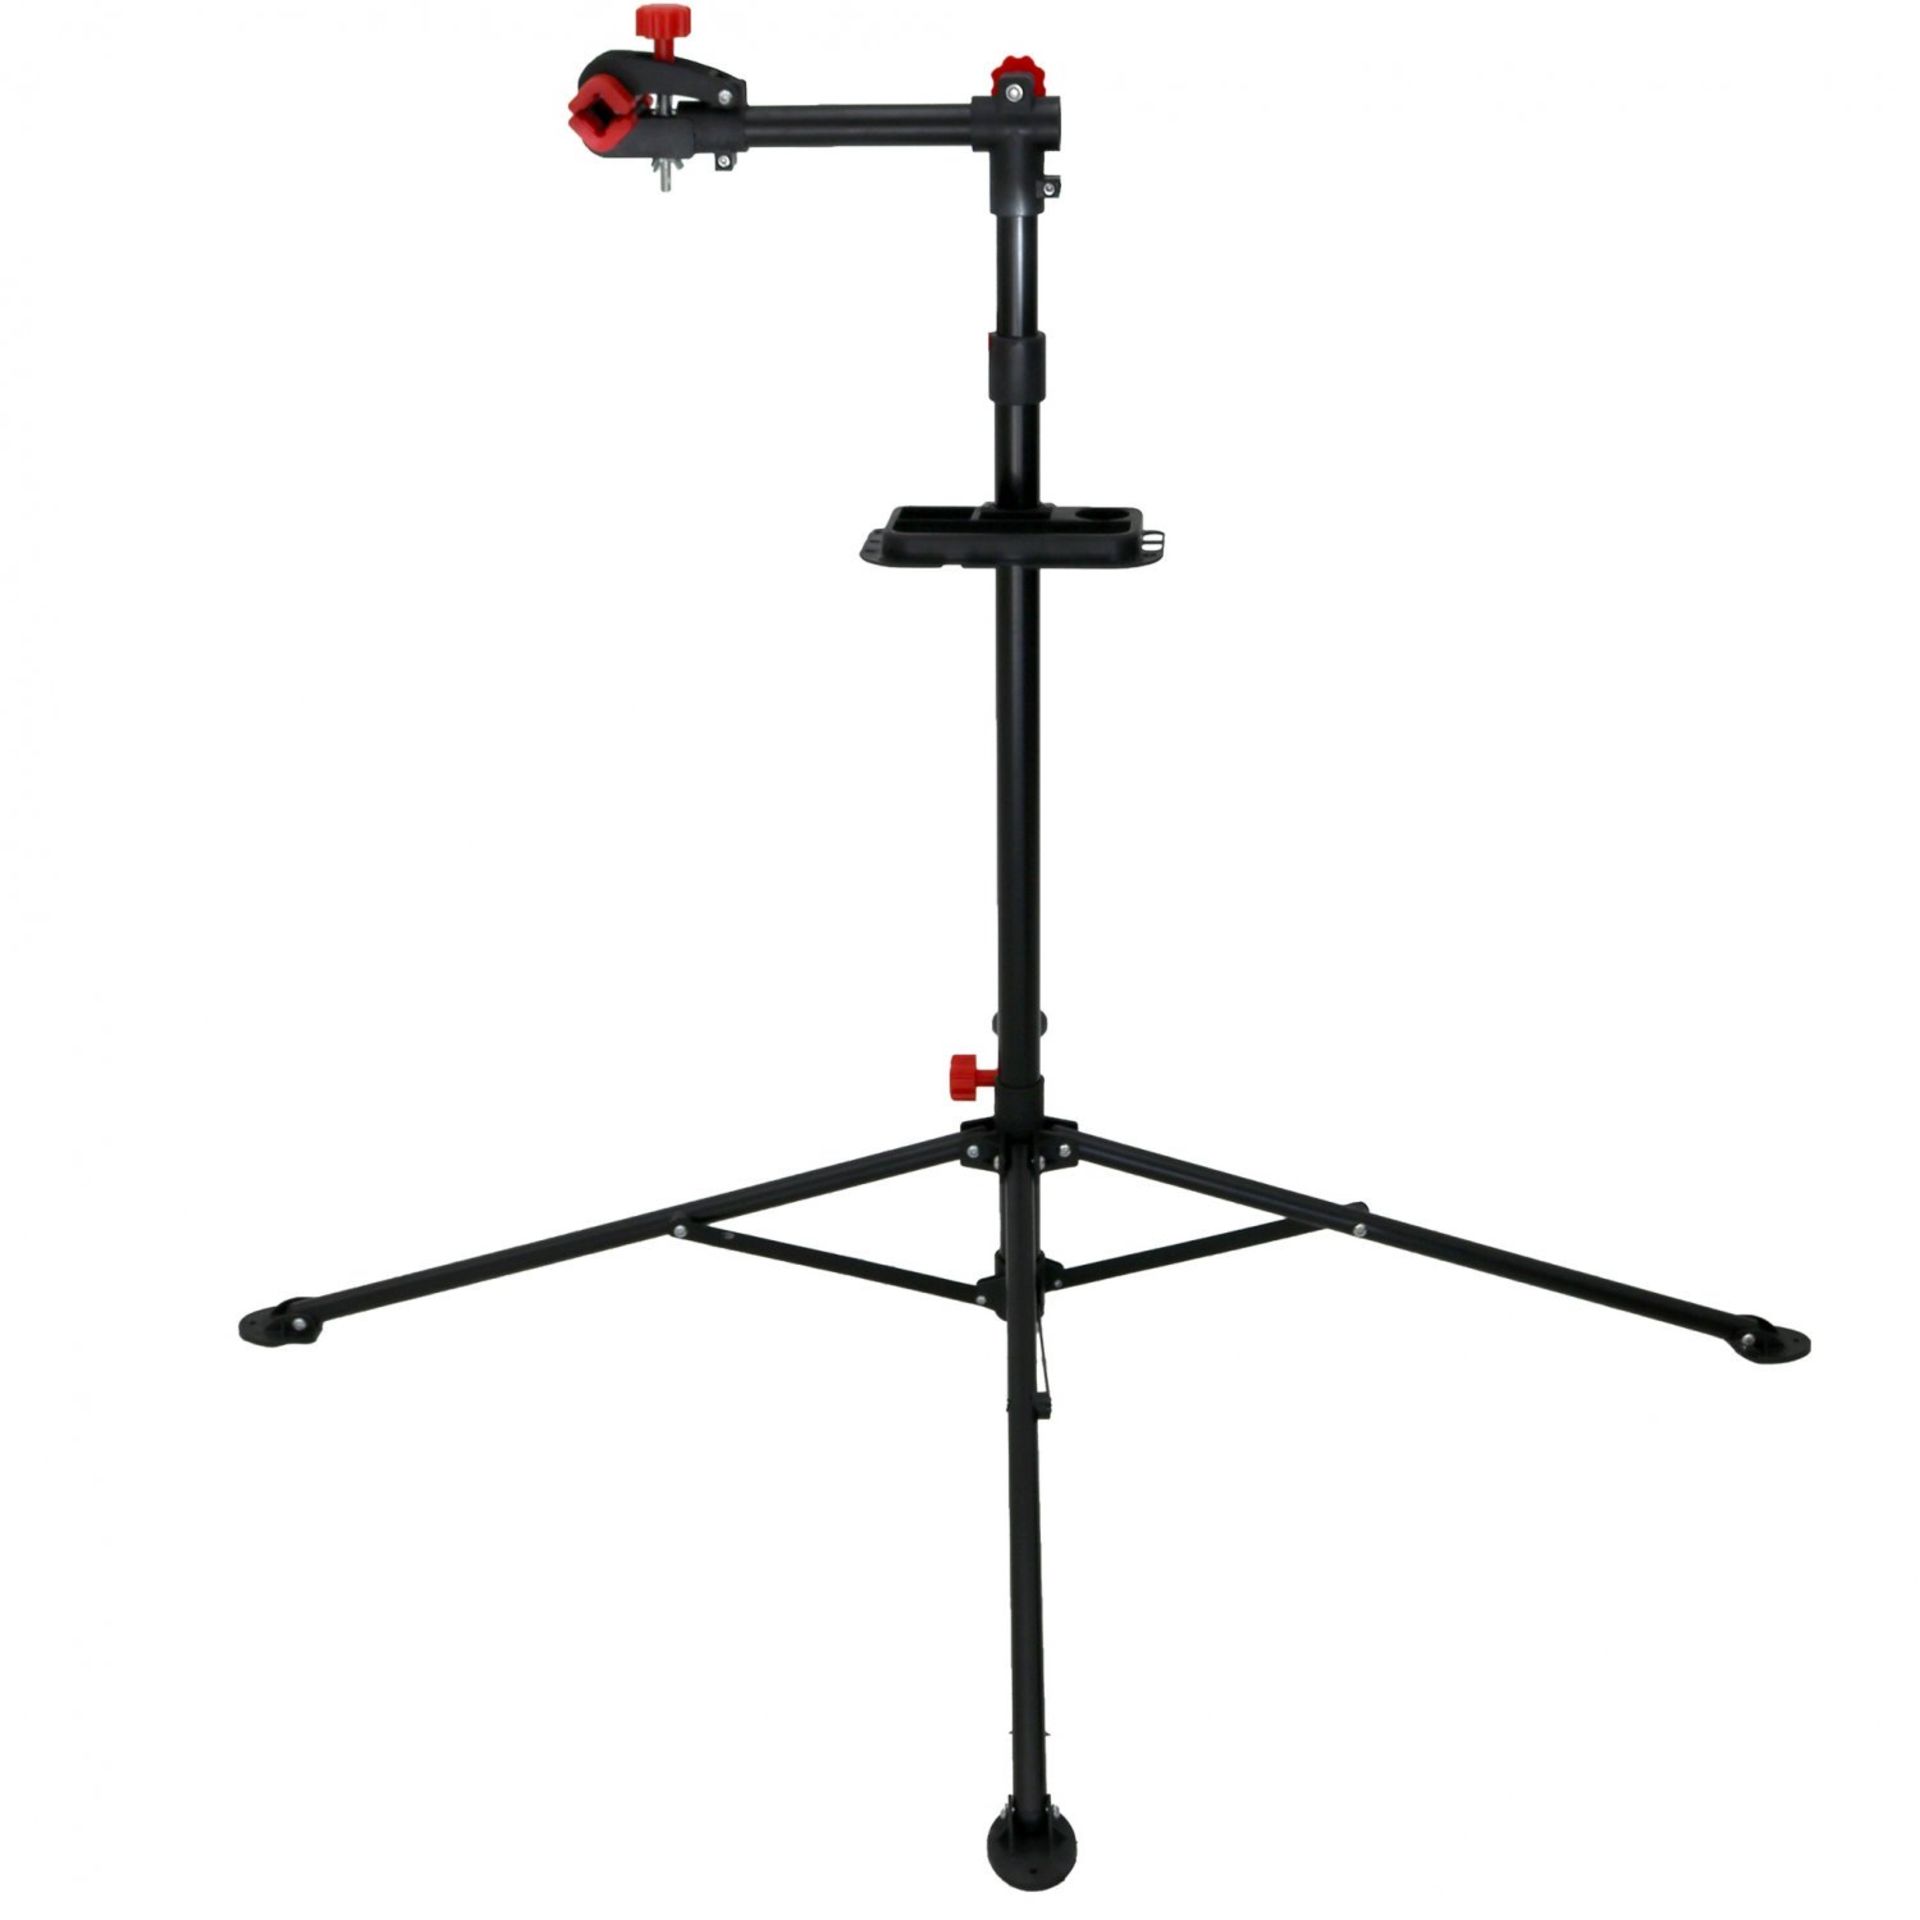 (PP530) Home Mechanic Folding Bicycle Repair Stand Latest design bike repair stand wi... - Image 2 of 2